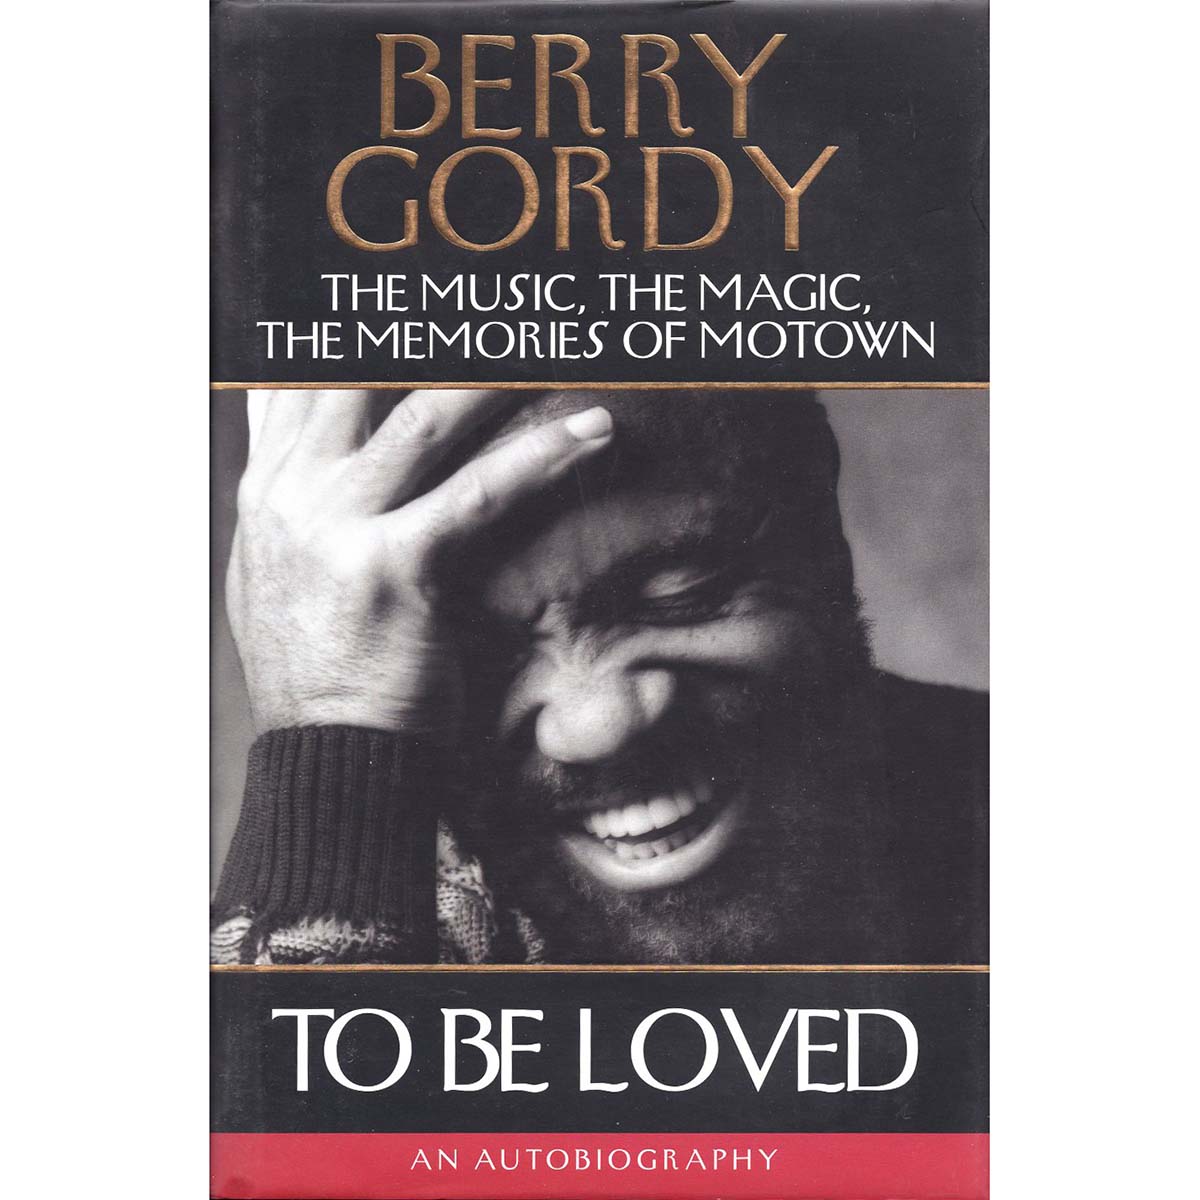 To Be Loved: The Music, the Magic, the Memories of Motown - An Autobiography (Berry Gordy)